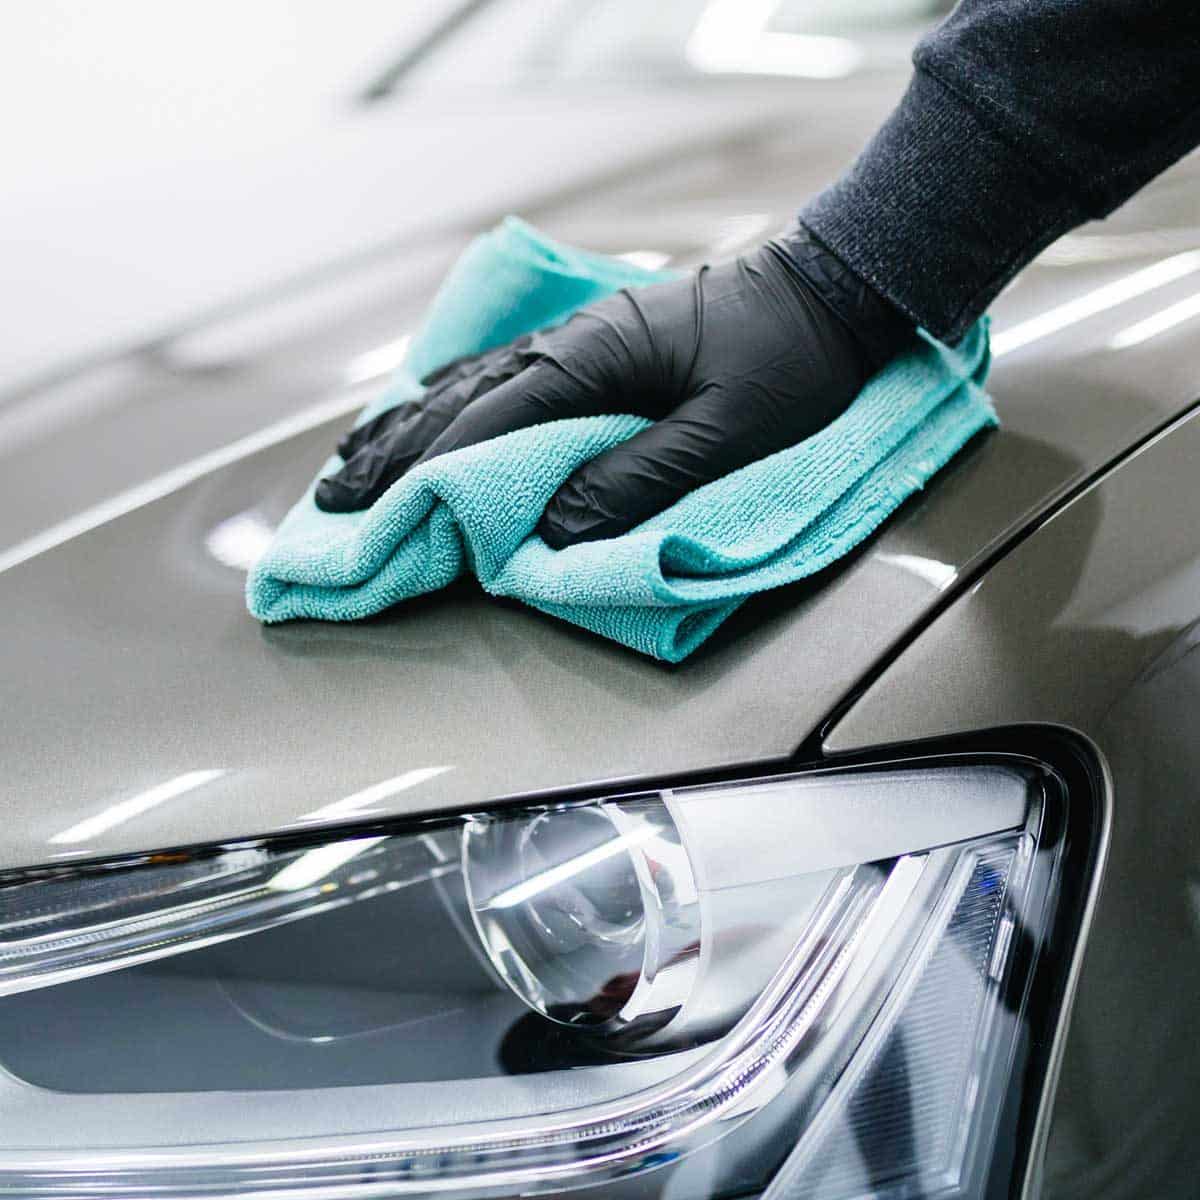 3 Easy Ways to Remove Scratches from a Car